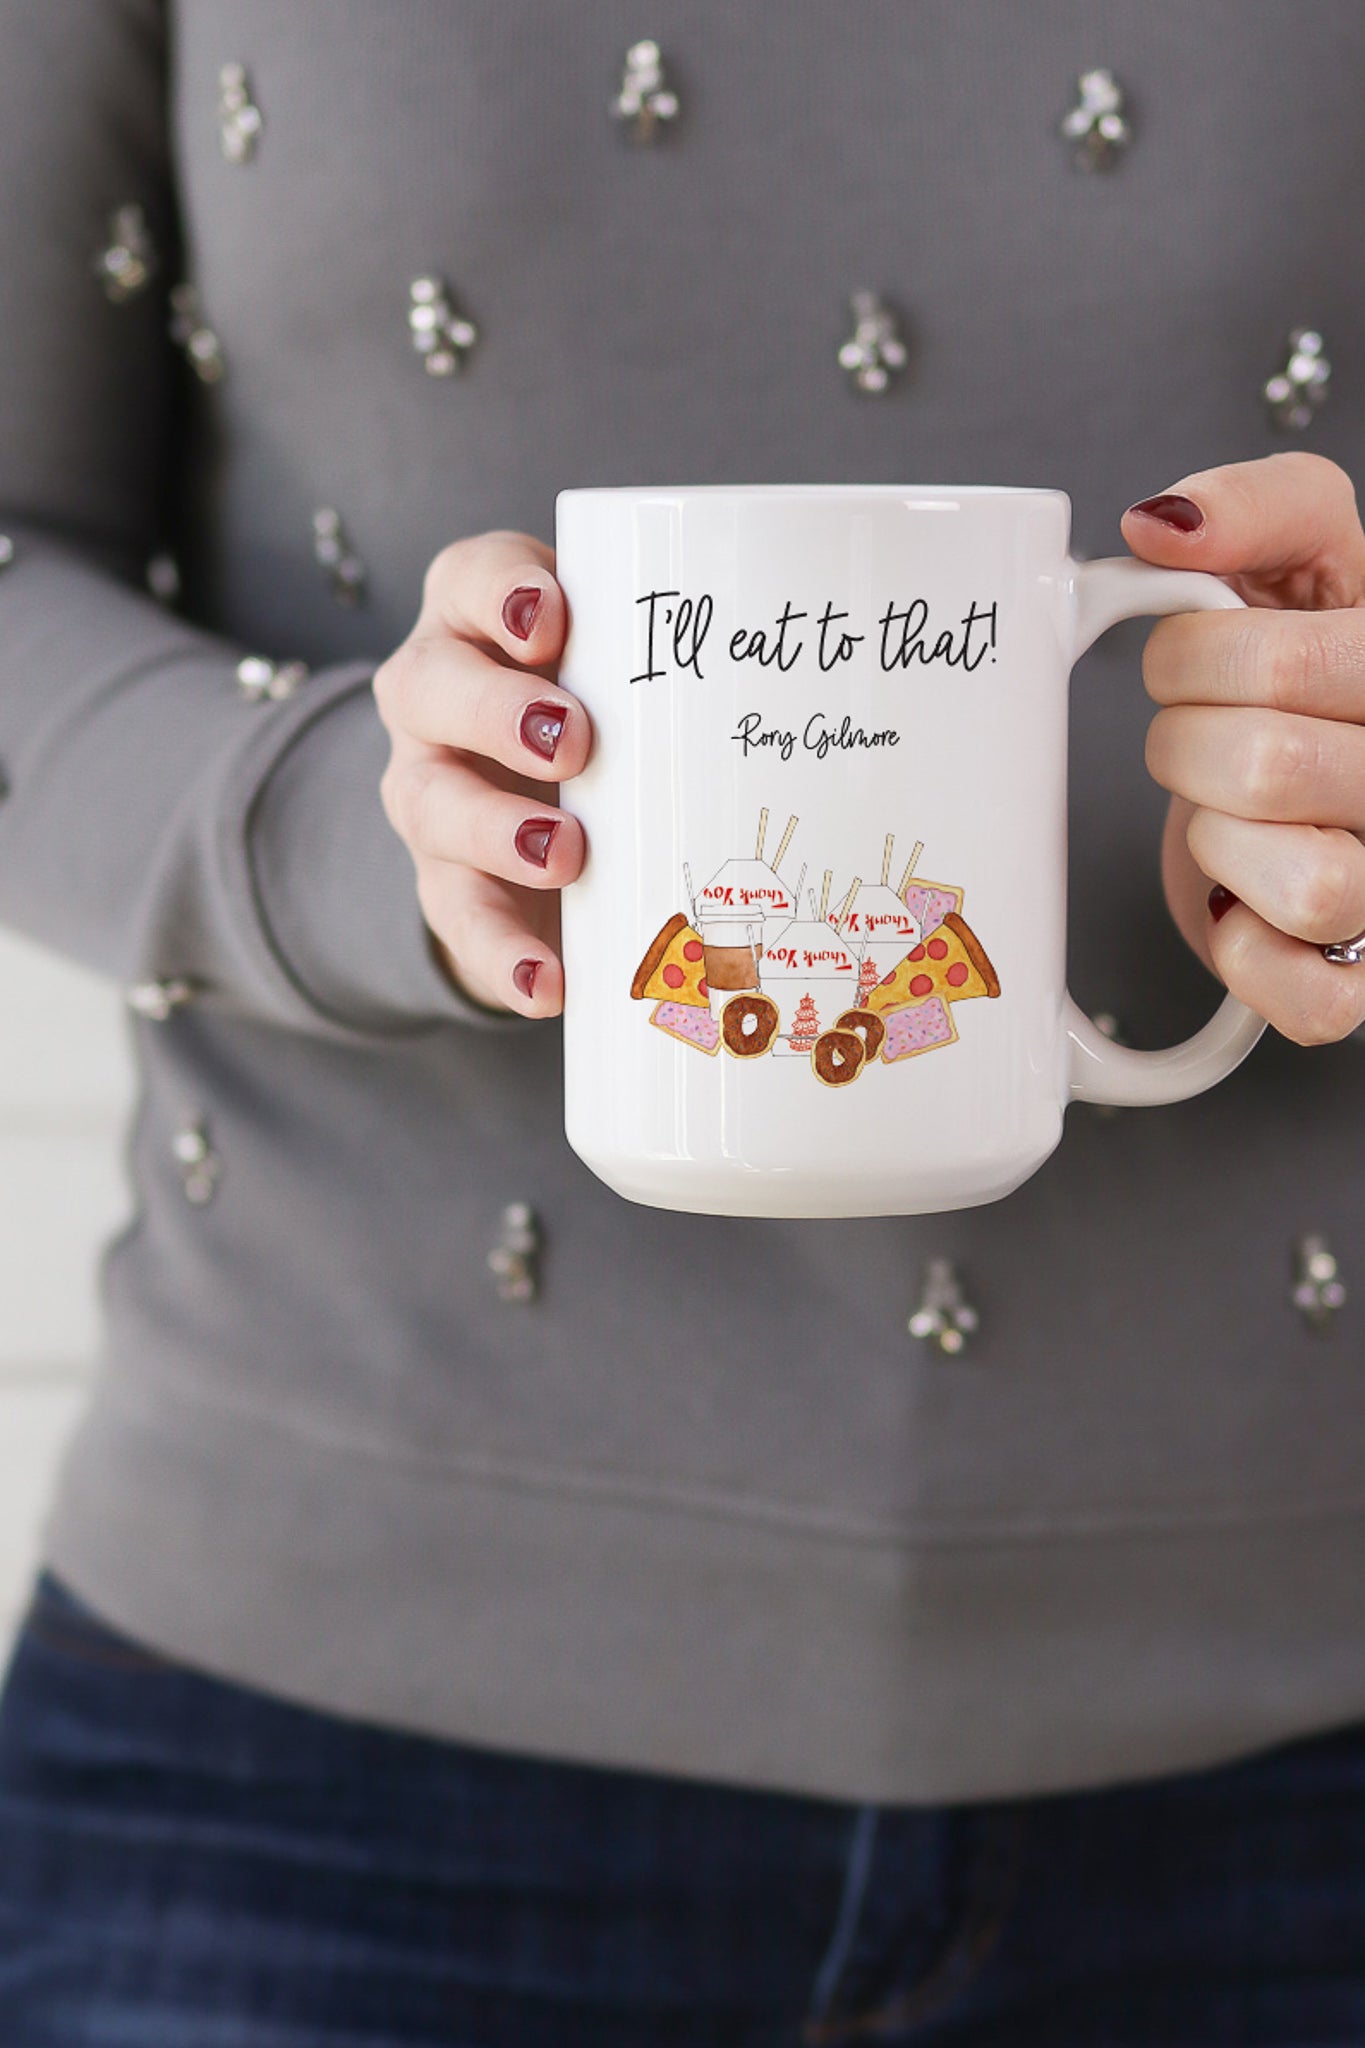 "I'll eat to that!" - Rory Gilmore  This is the perfect mug for anyone who loves all things Gilmore Girls! 